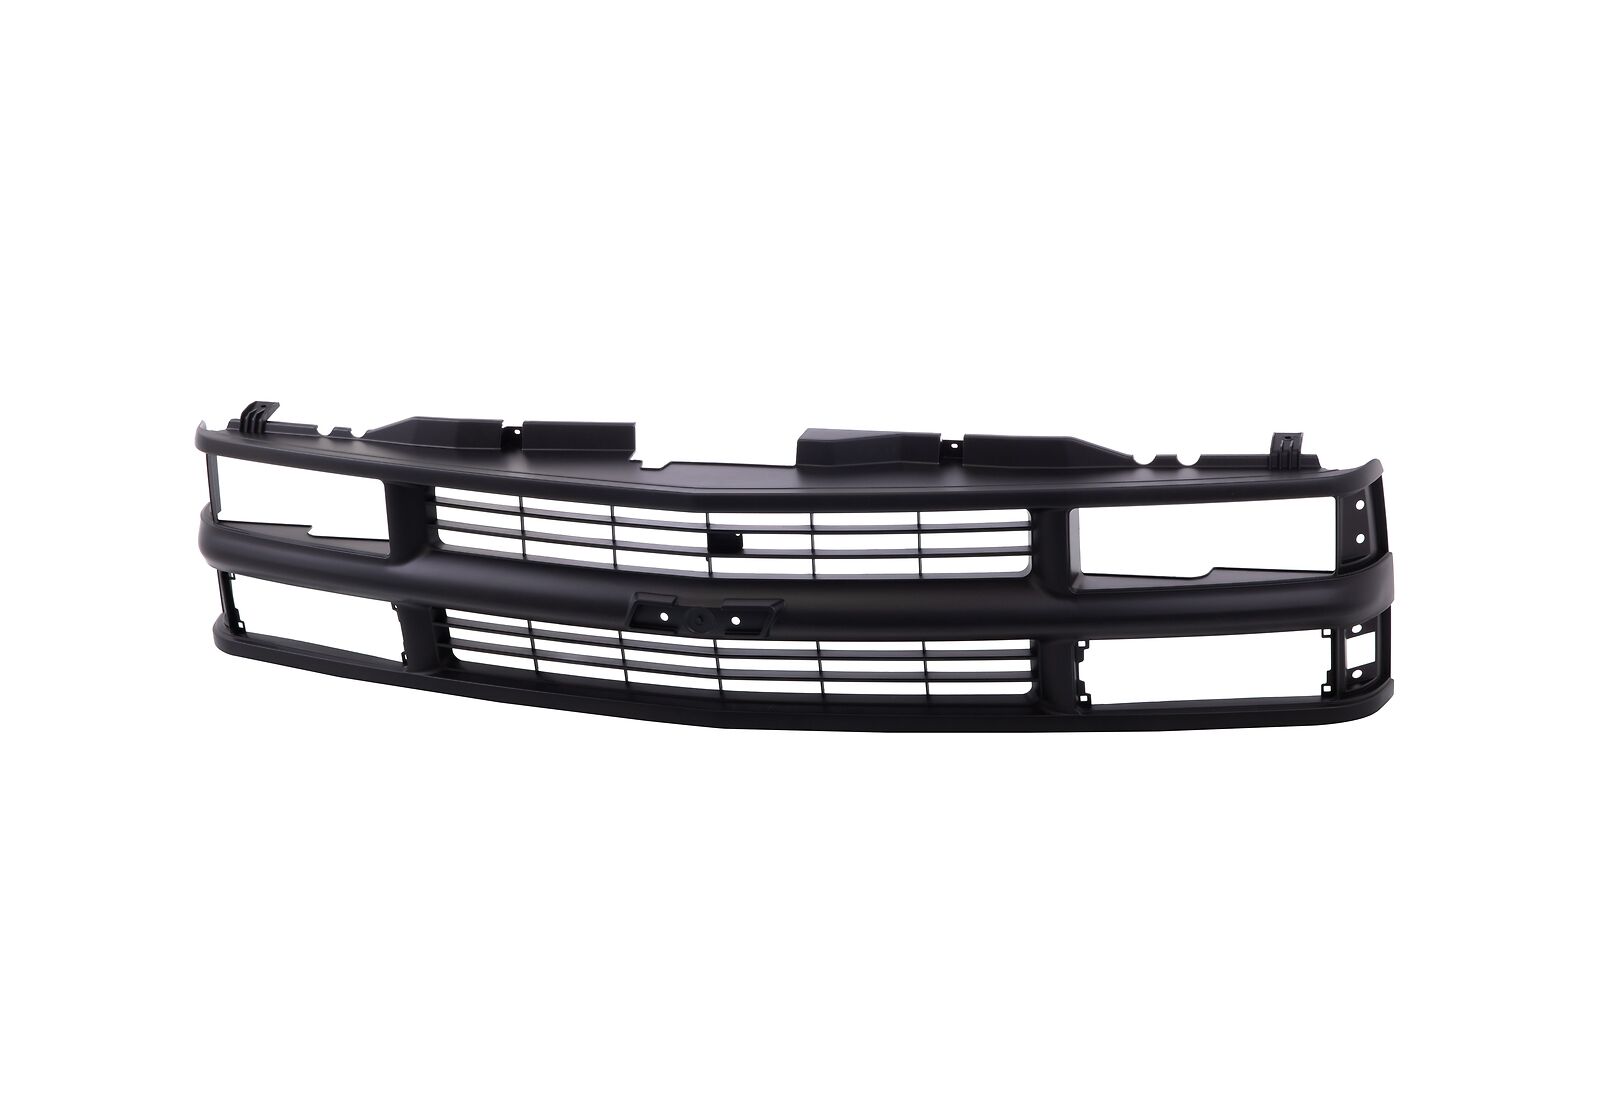 Full Black Grille Fits 94-98 Chevy C/K 1500 2500 3500 Composite Pickup Truck